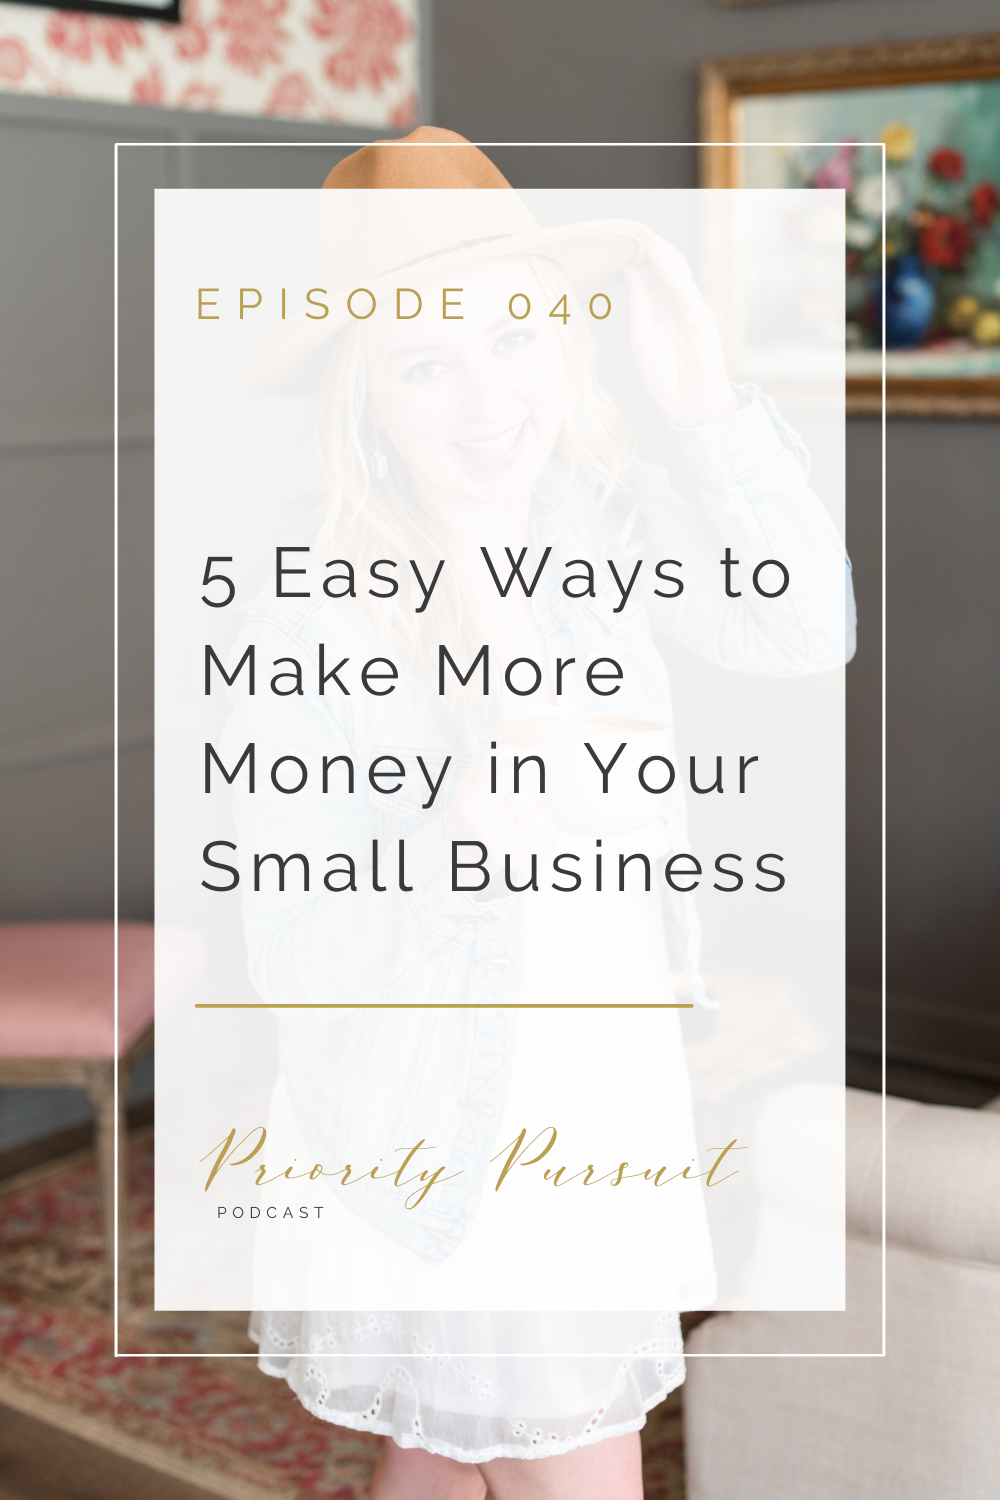 Victoria Rayburn shares five easy ways to make more money in your small business in this episode of “Priority Pursuit.” 